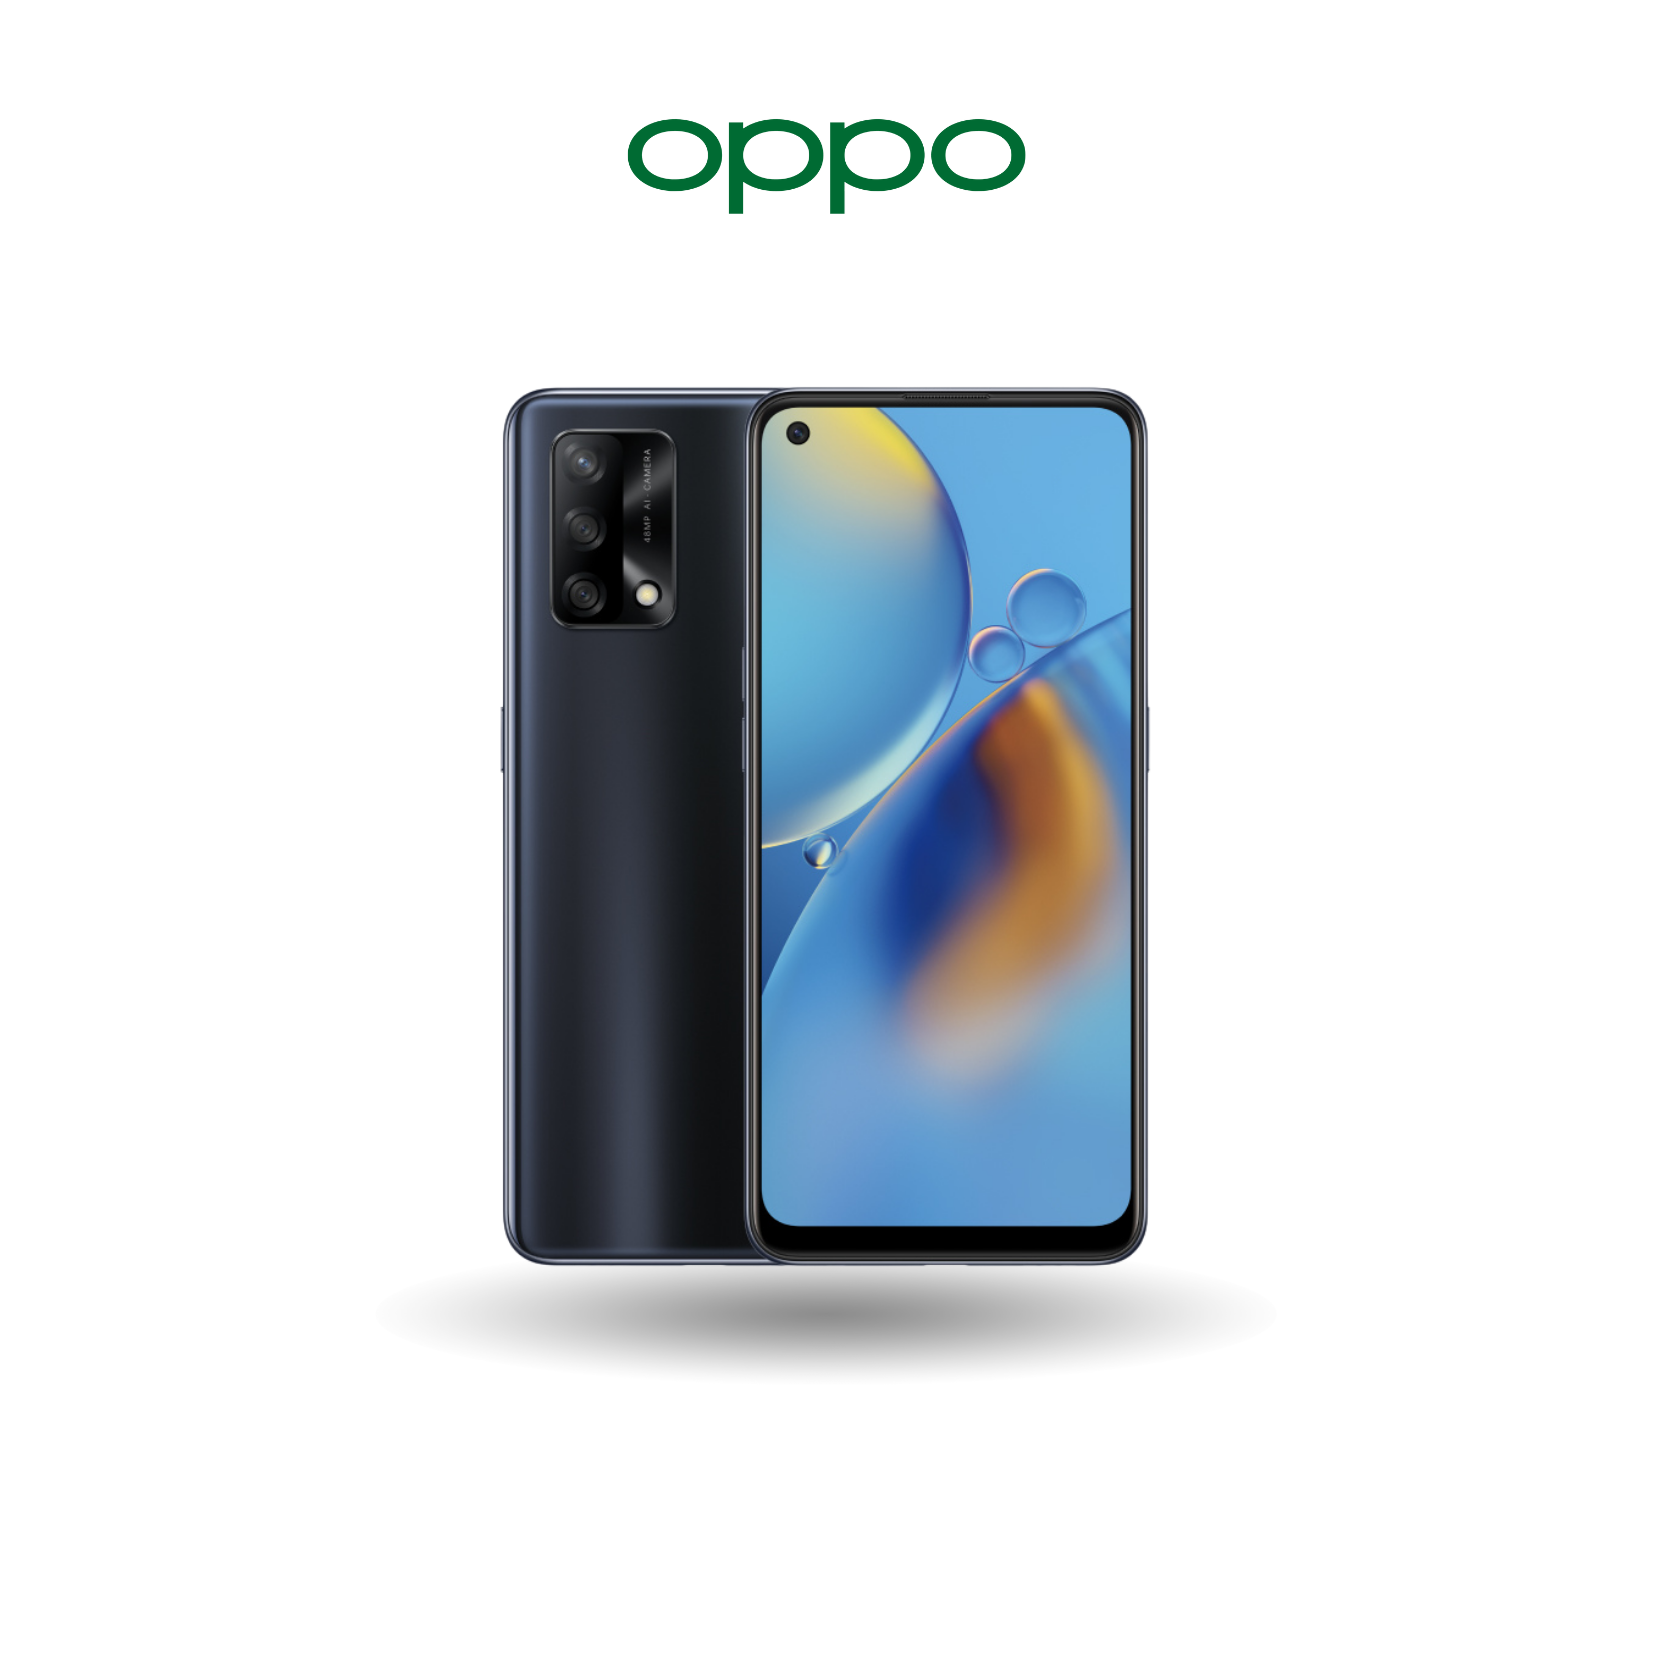 Oppo A74 128GB - AMOLED FHD + Punch-Hole Display | Game Focus Mode | 33W Flash